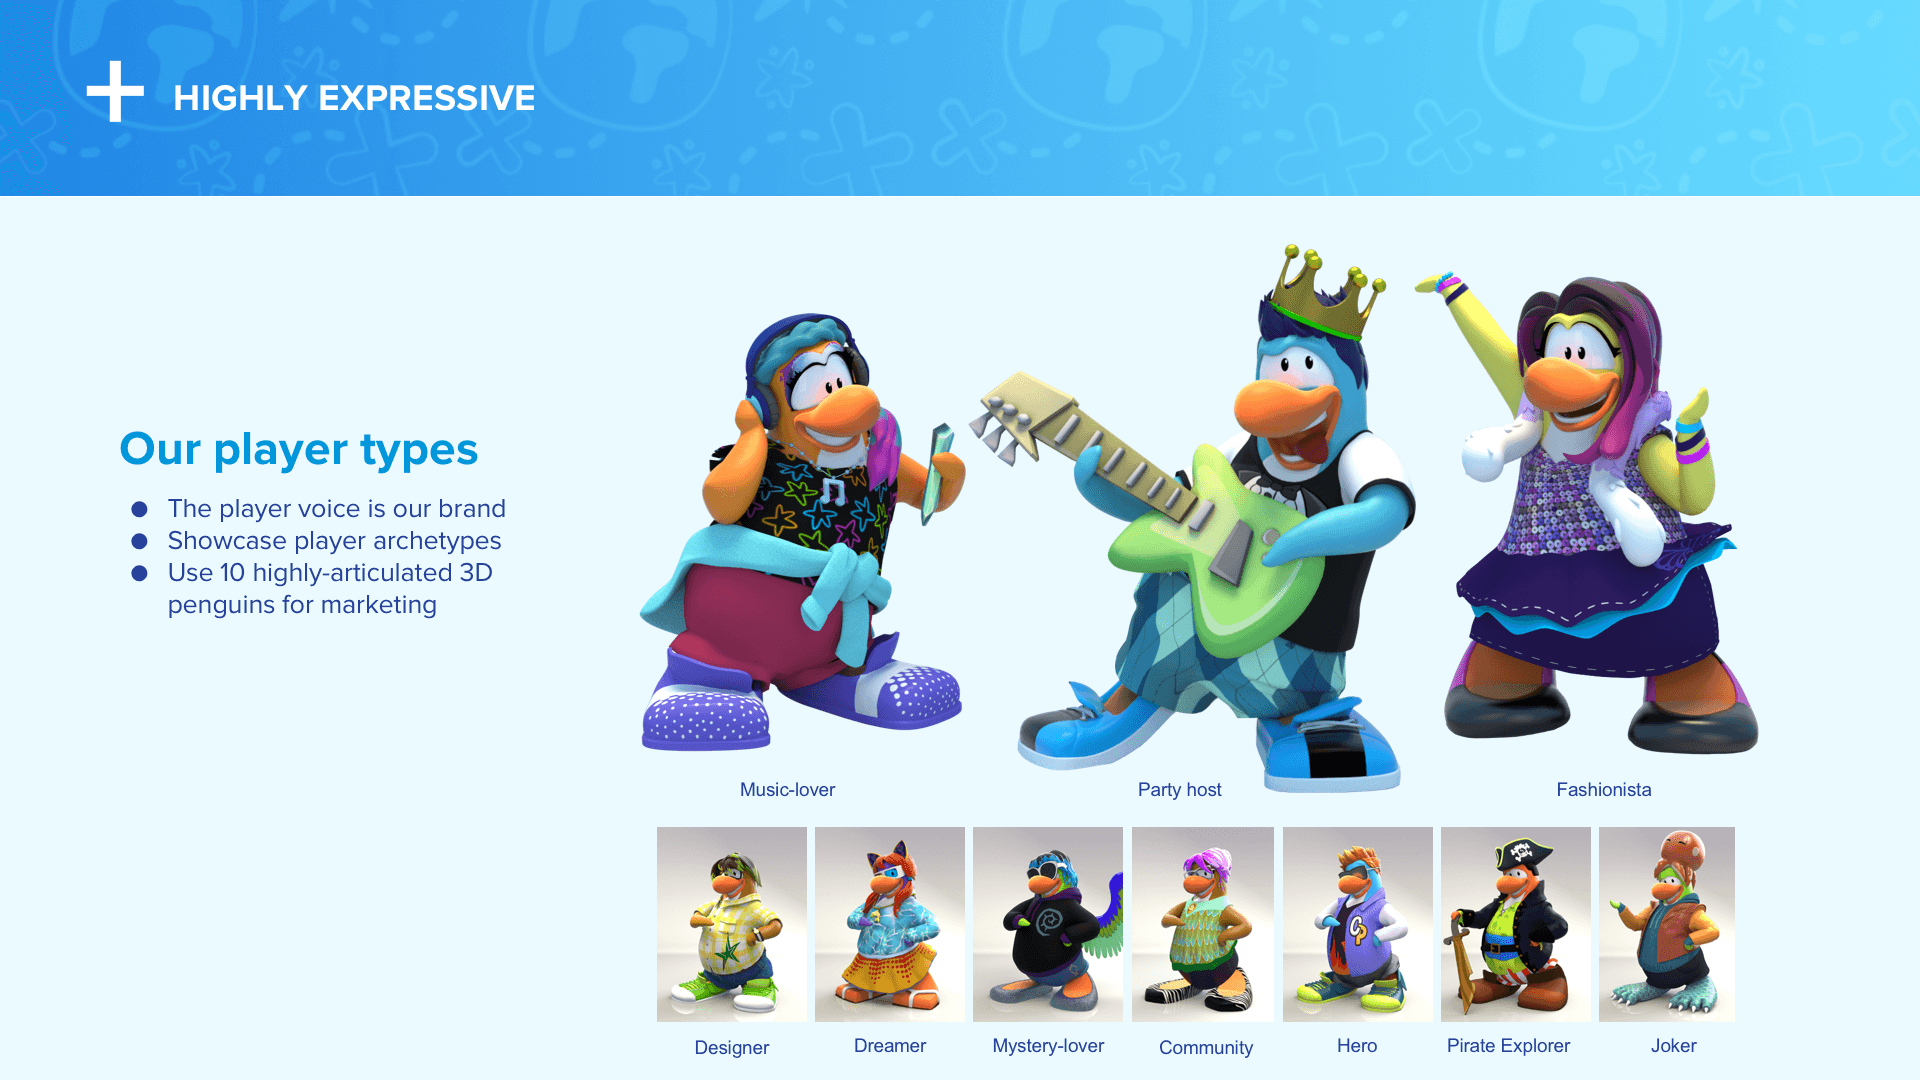 Club Penguin Island - Fonts In Use